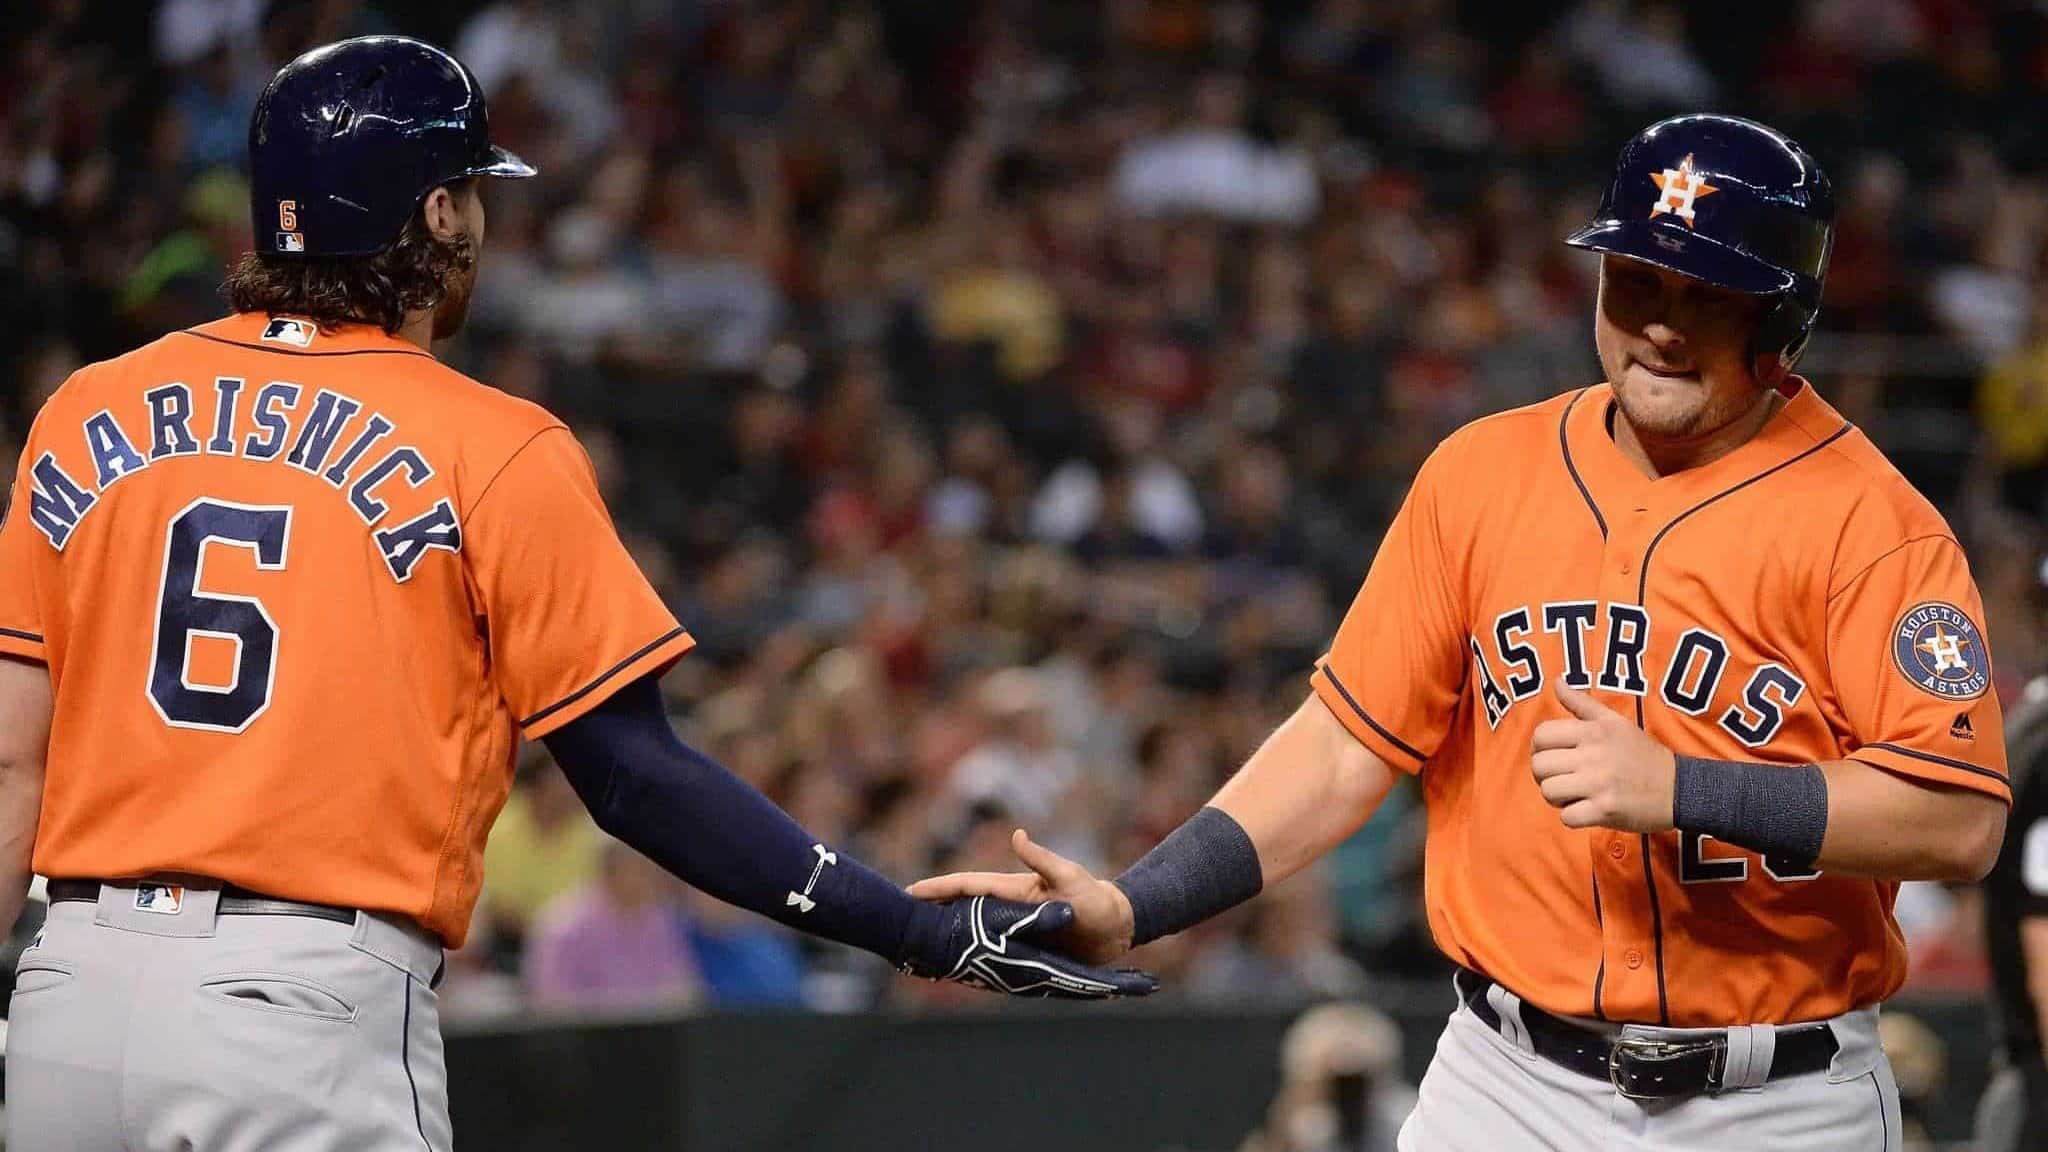 PHOENIX, AZ - AUGUST 15: J.D. Davis #28 of the Houston Astros is congratulated by Jake Marisnick #6 after scoring against the Arizona Diamondbacks in the second inning at Chase Field on August 15, 2017 in Phoenix, Arizona.